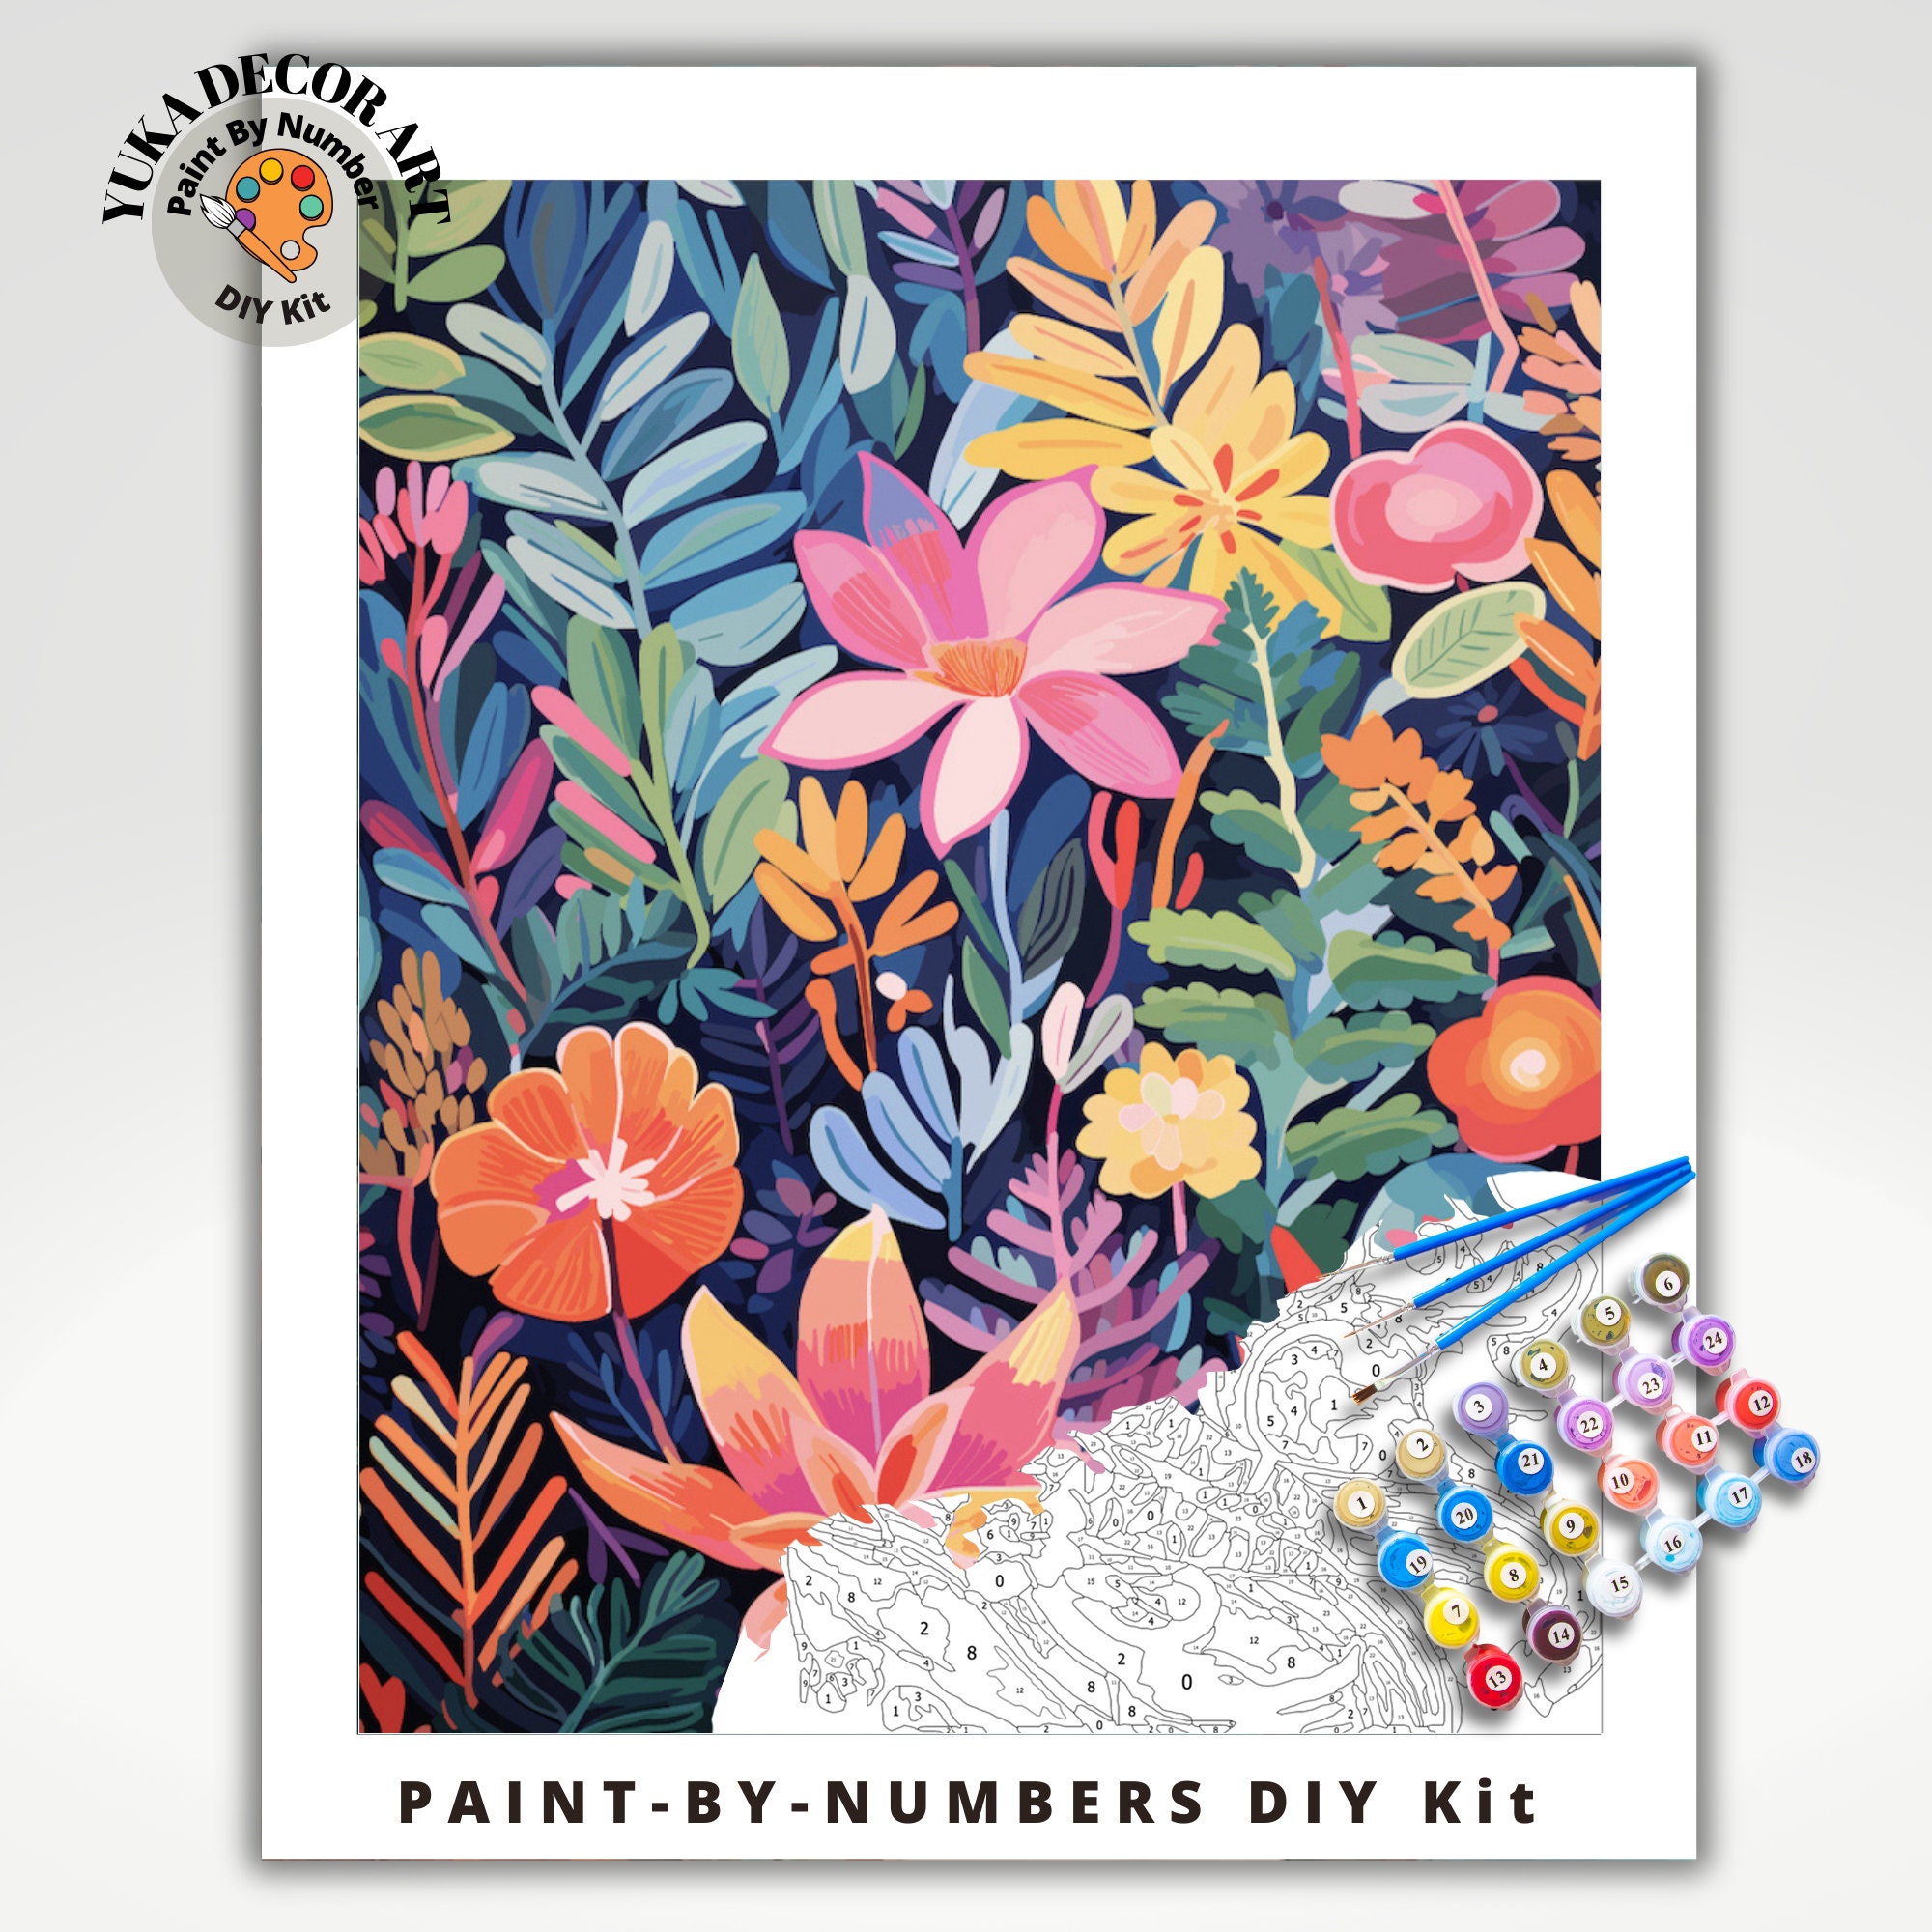 Paris Flower Street - Paint by Number Kit for Adults DIY Oil